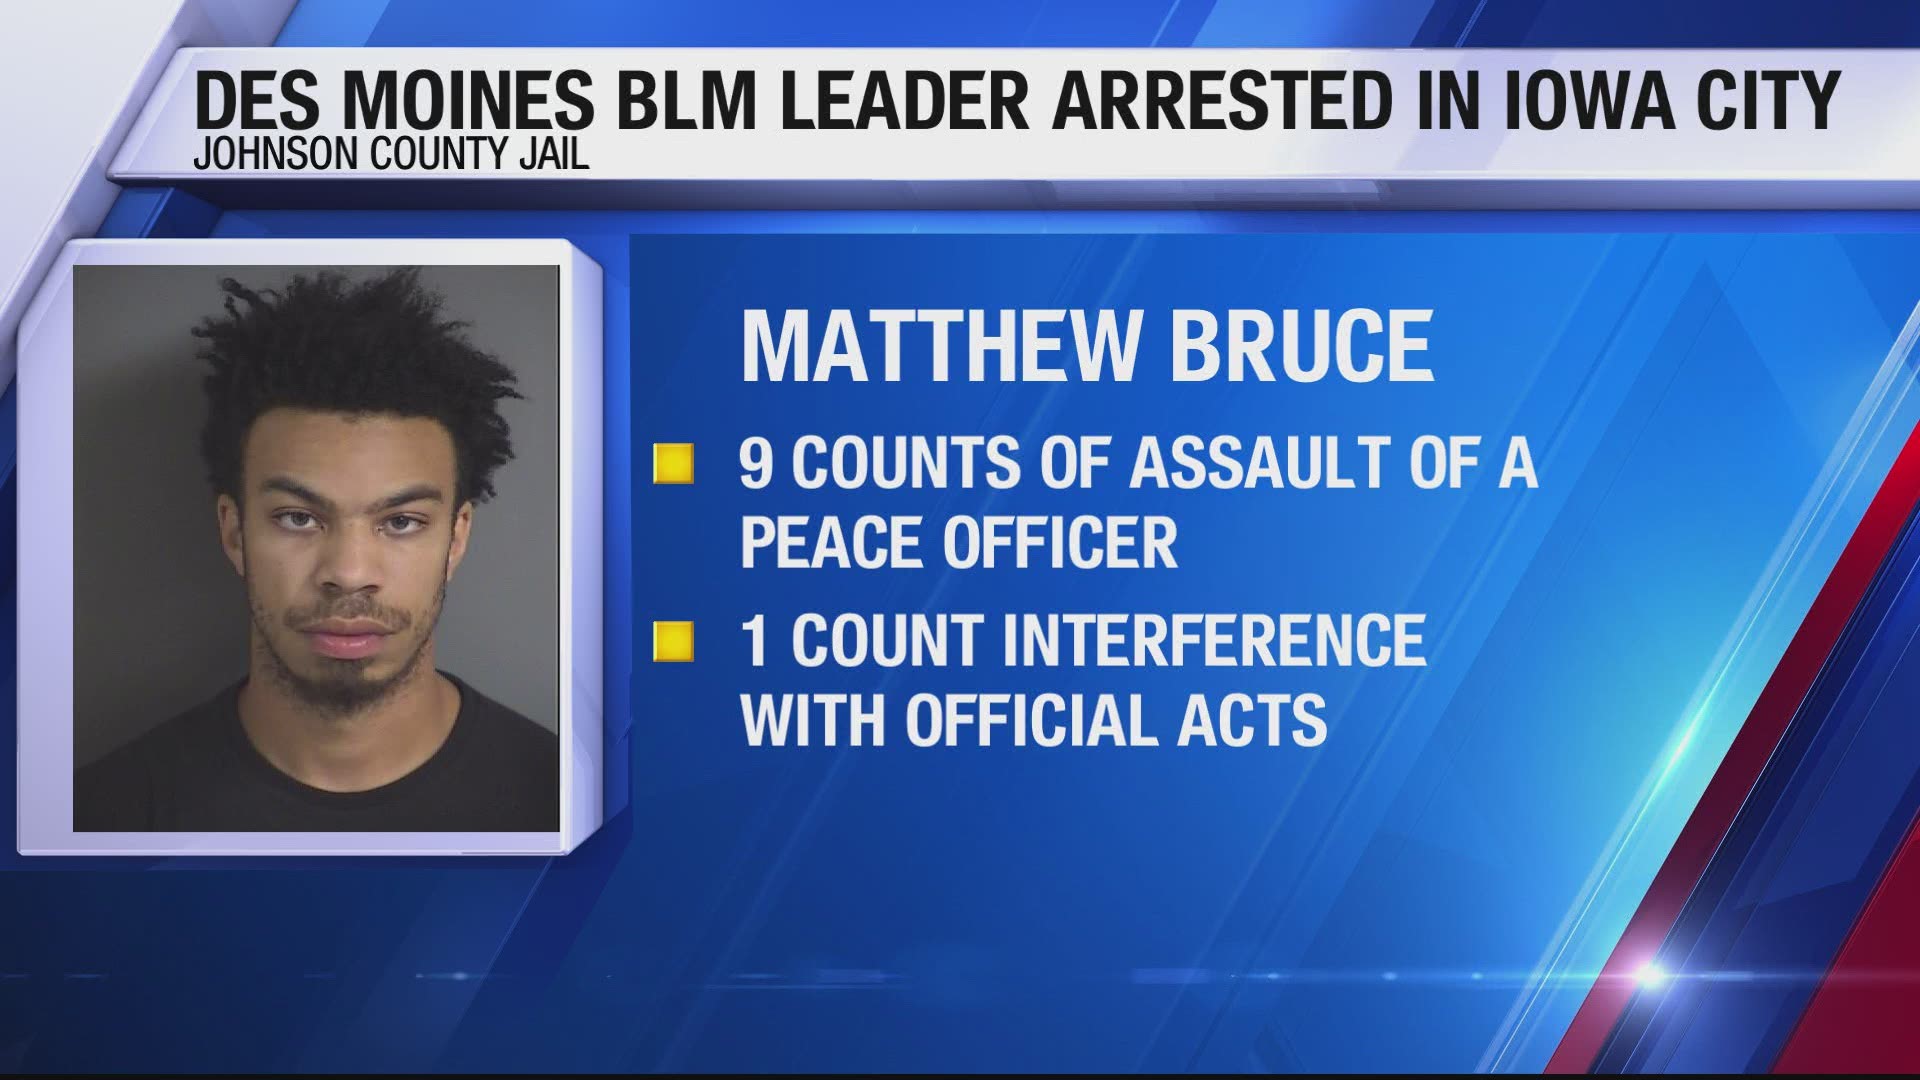 24-year-old Matthew Bruce faces nine charges of assault of a peace officer with intent of injury and one charge of interference with official acts.